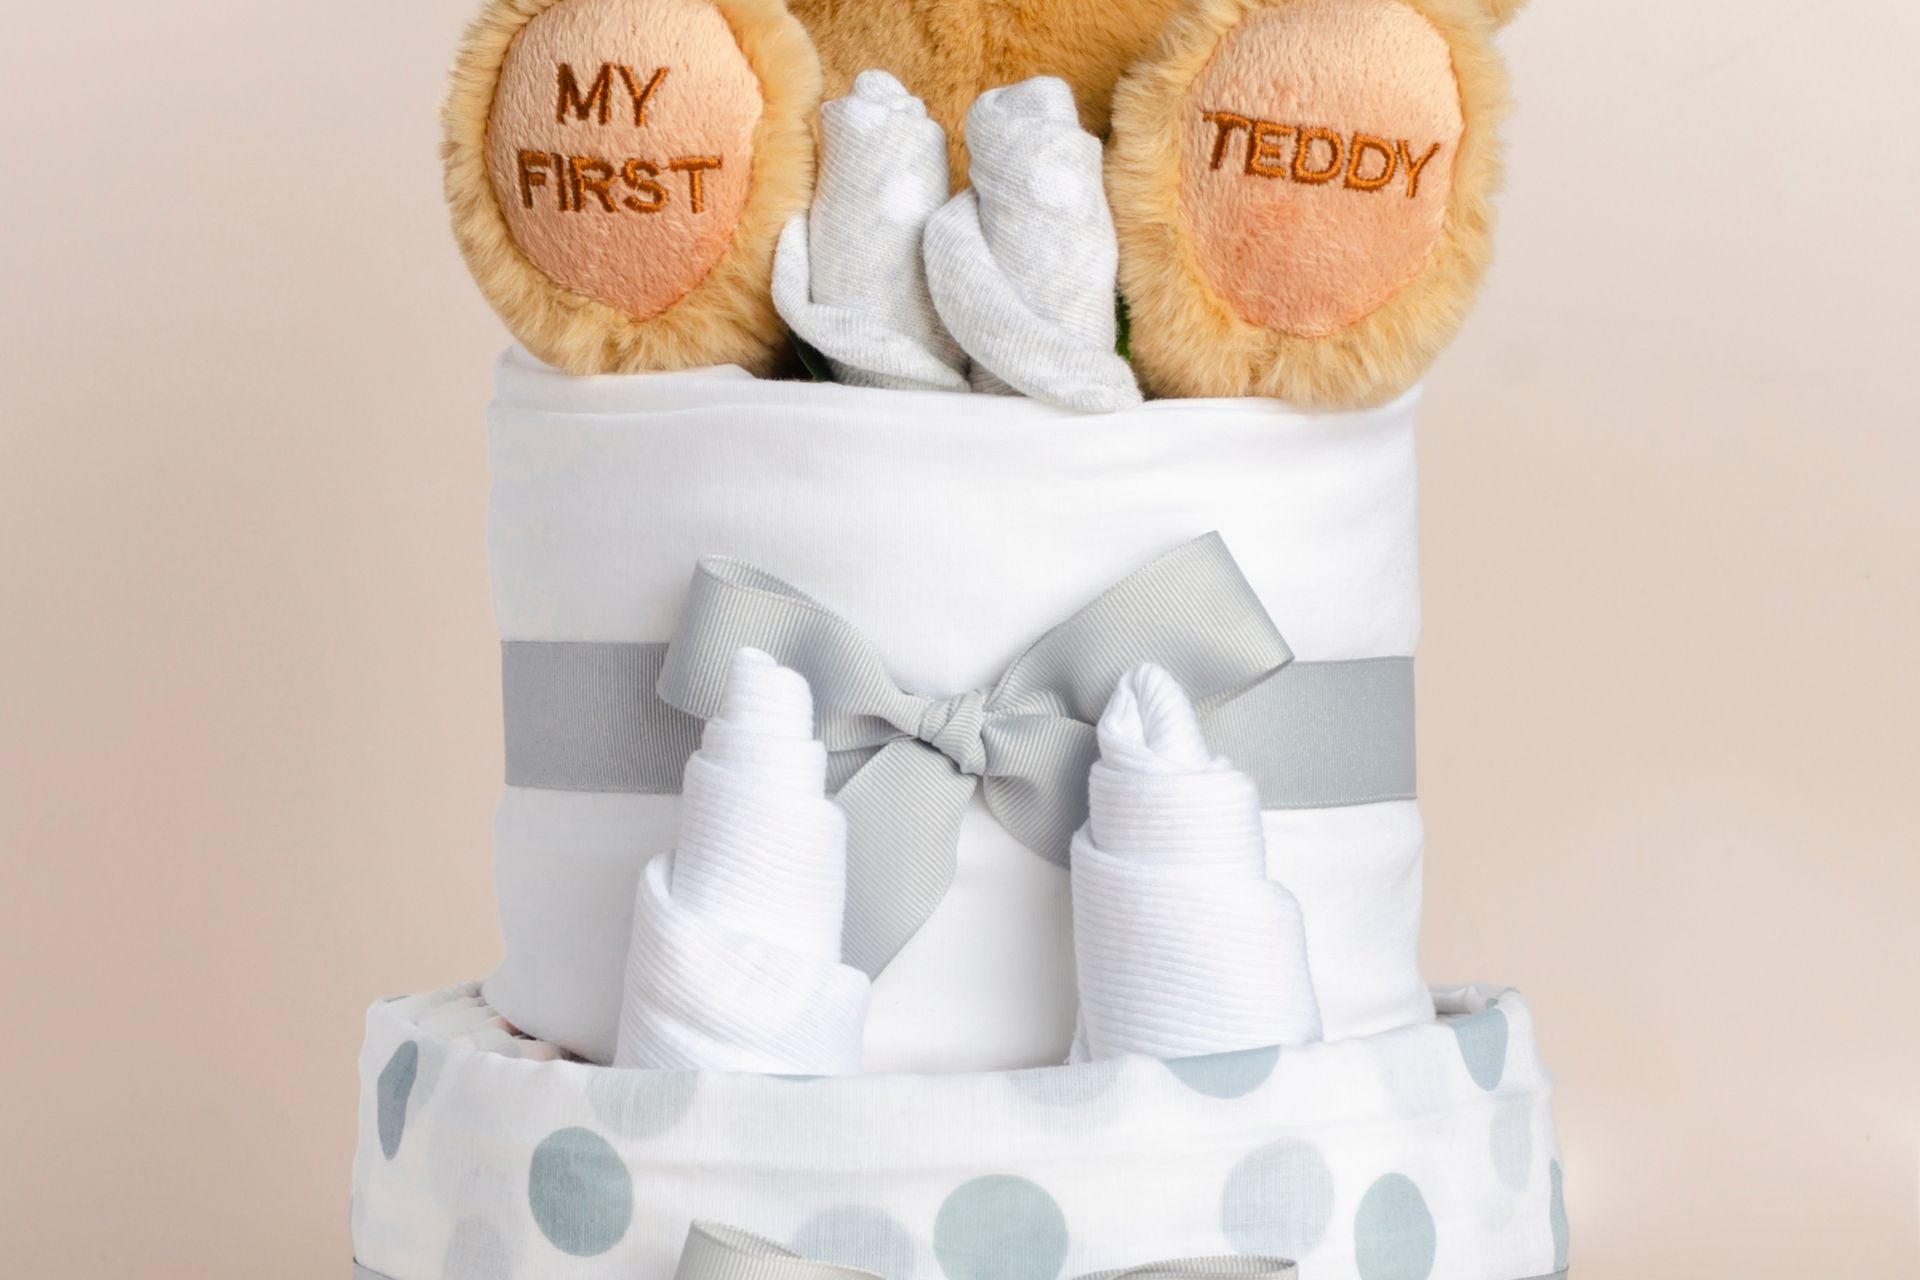 Can't Make it to the Baby Shower? Send a Nappy Cake!